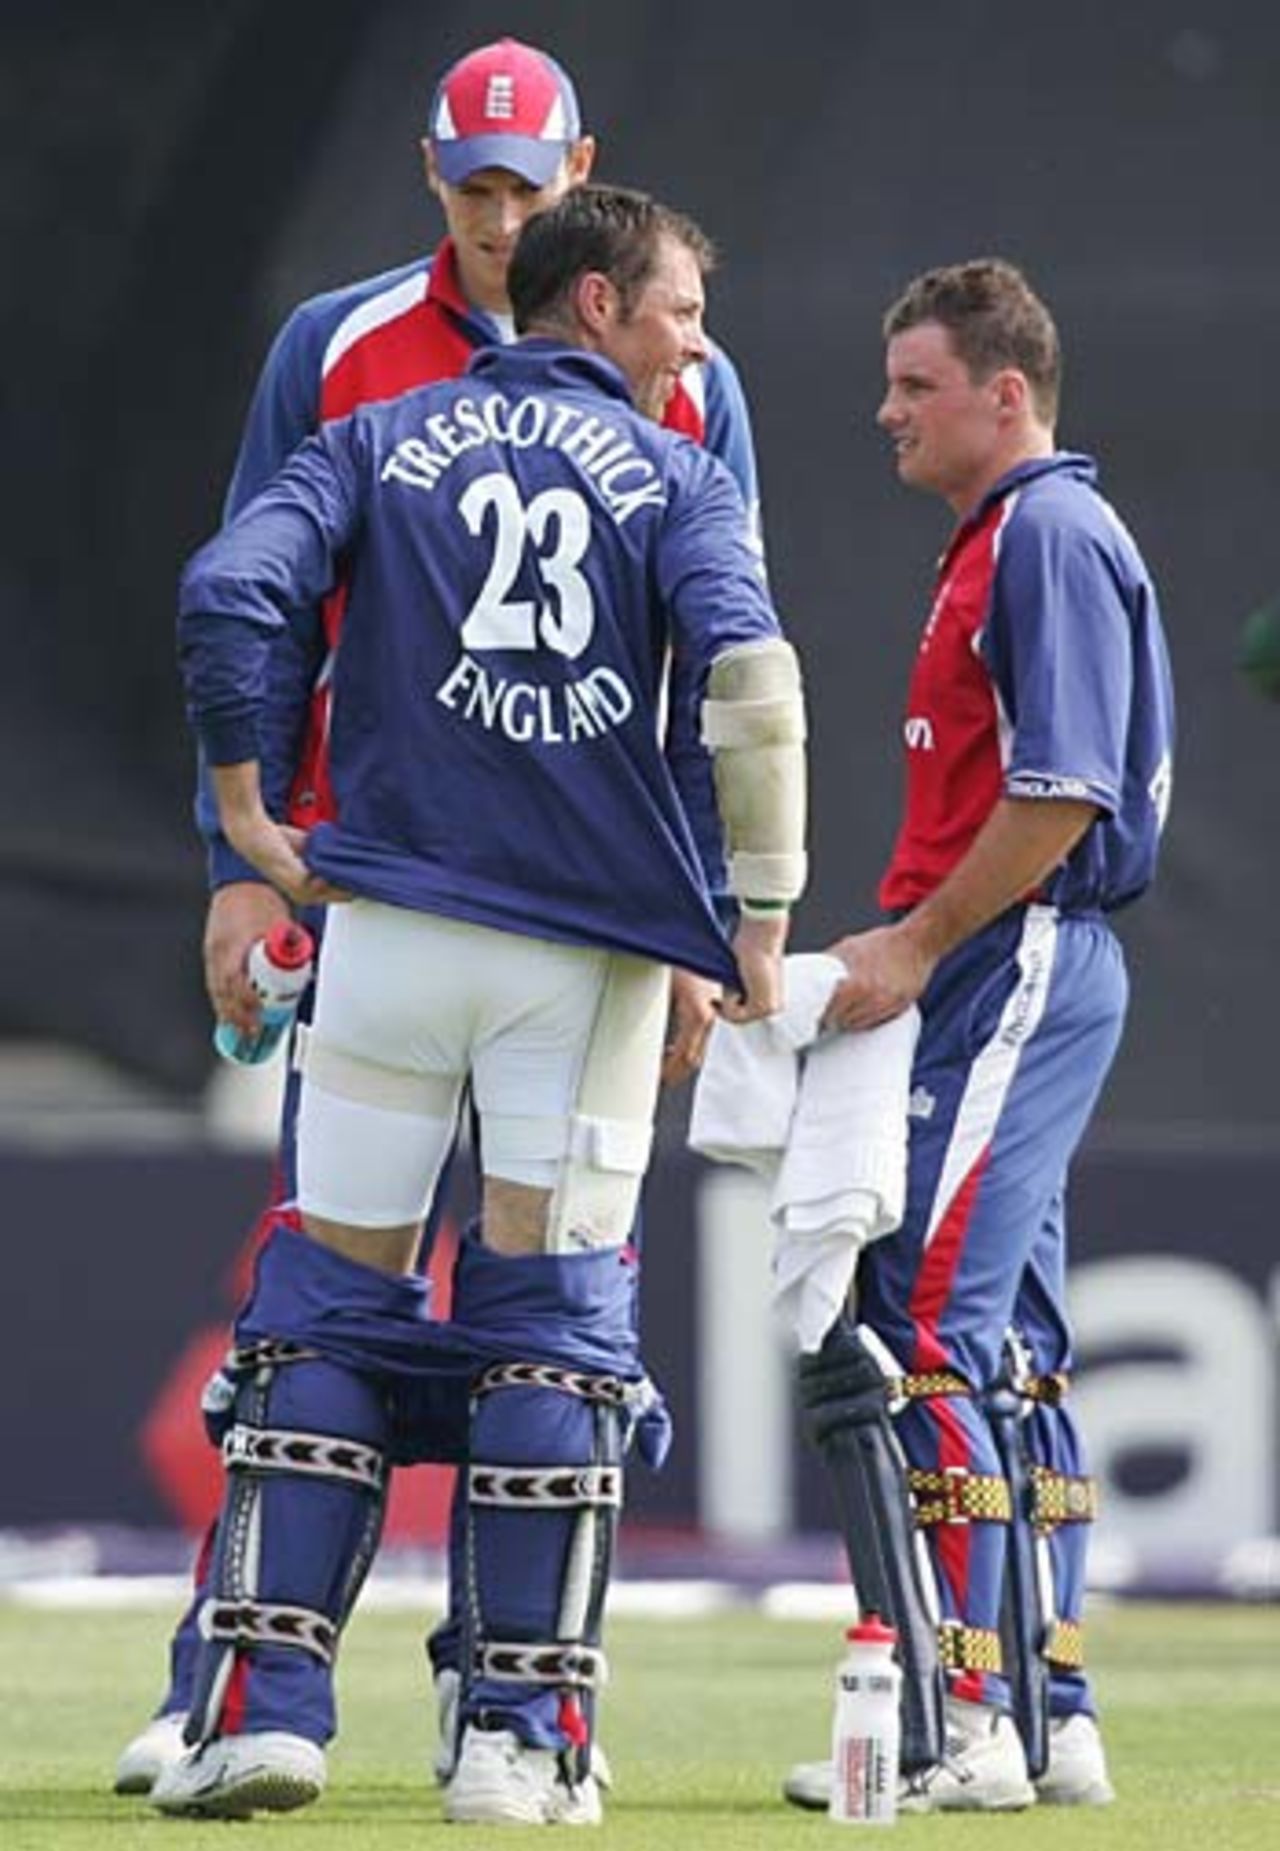 Caught with his trousers down ... running repairs for Marcus Trescothick, England v Australia, Headingley, July 7, 2005